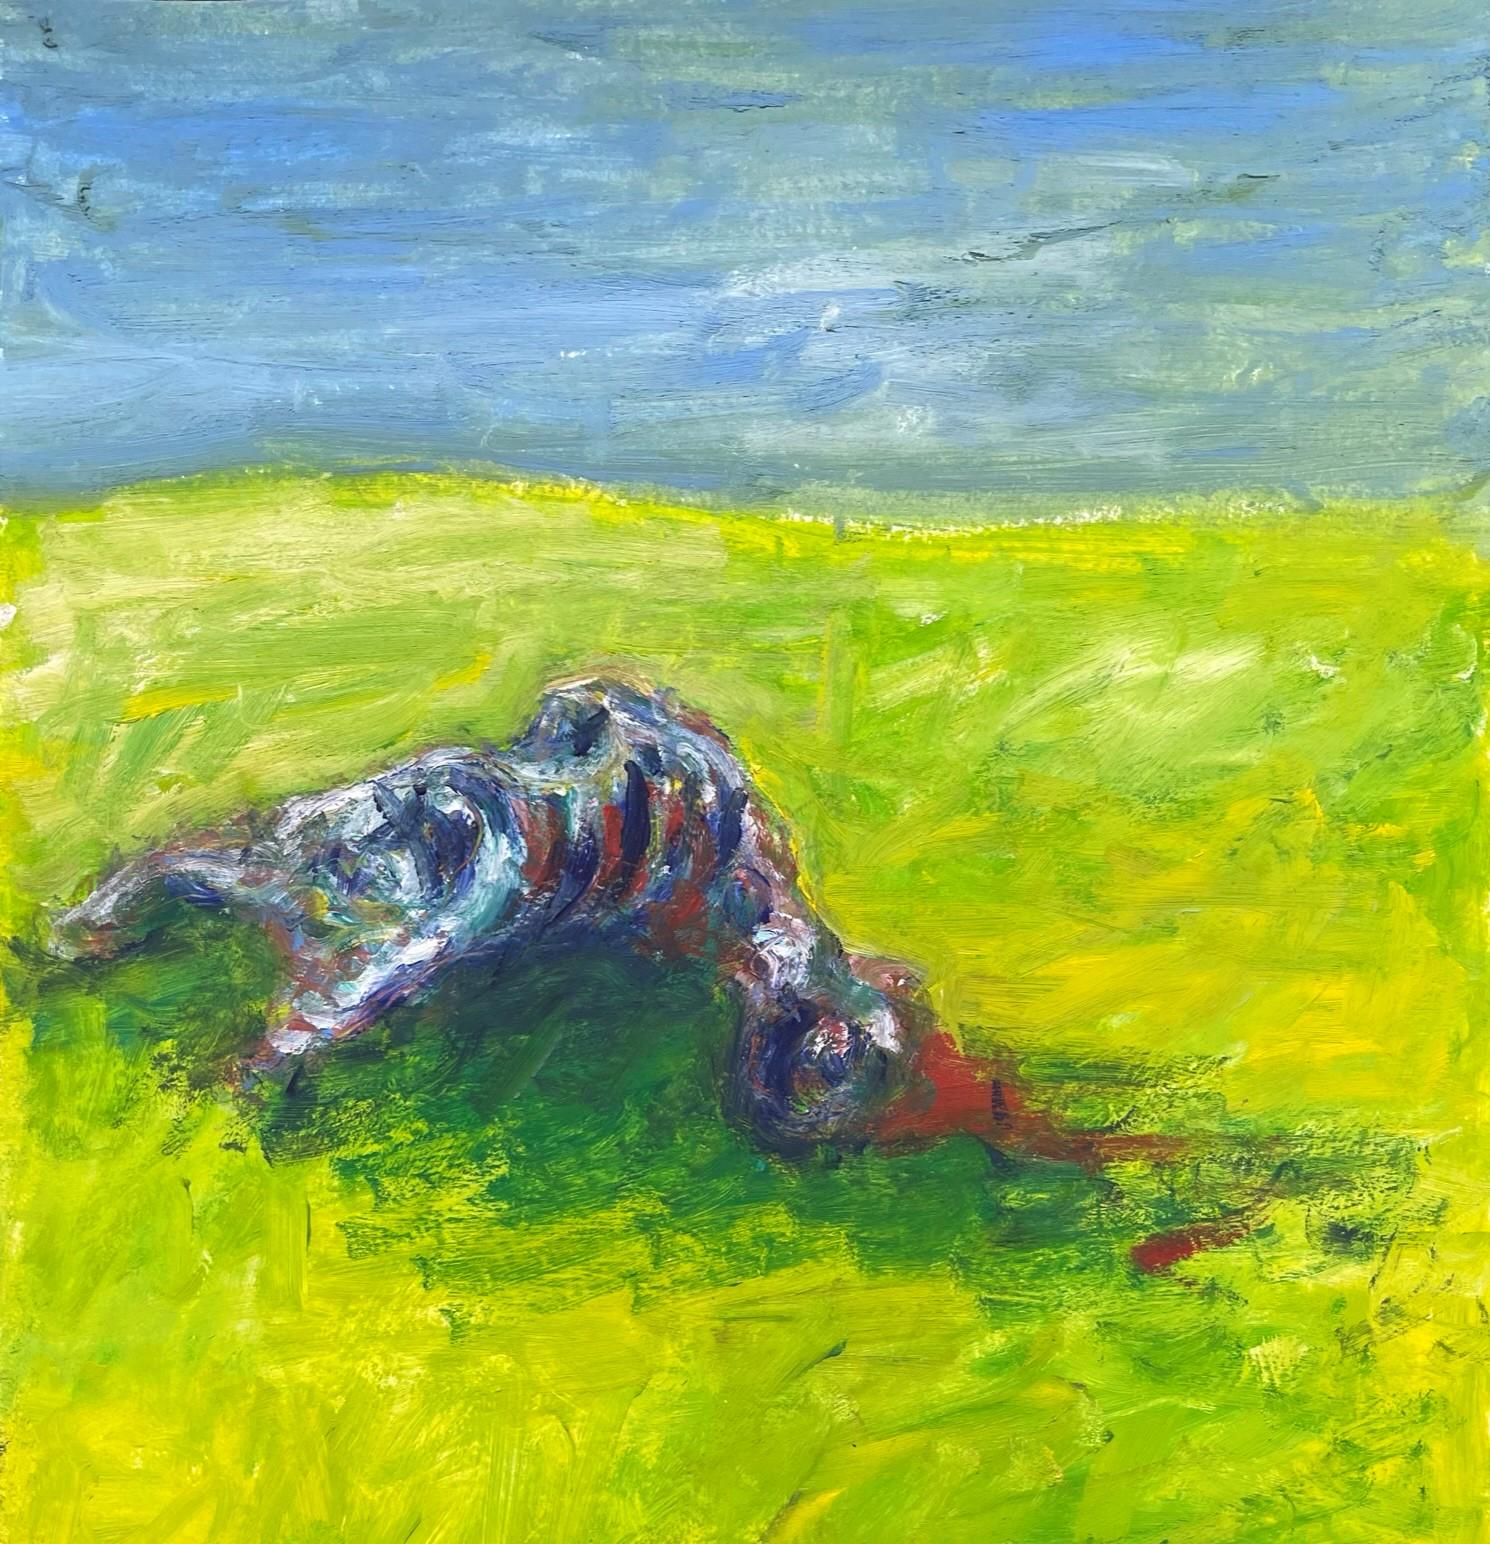 Remains (Body in the Field 9) - 21st Century, Green, Blue, Contemporary - Art by Zsolt Berszán